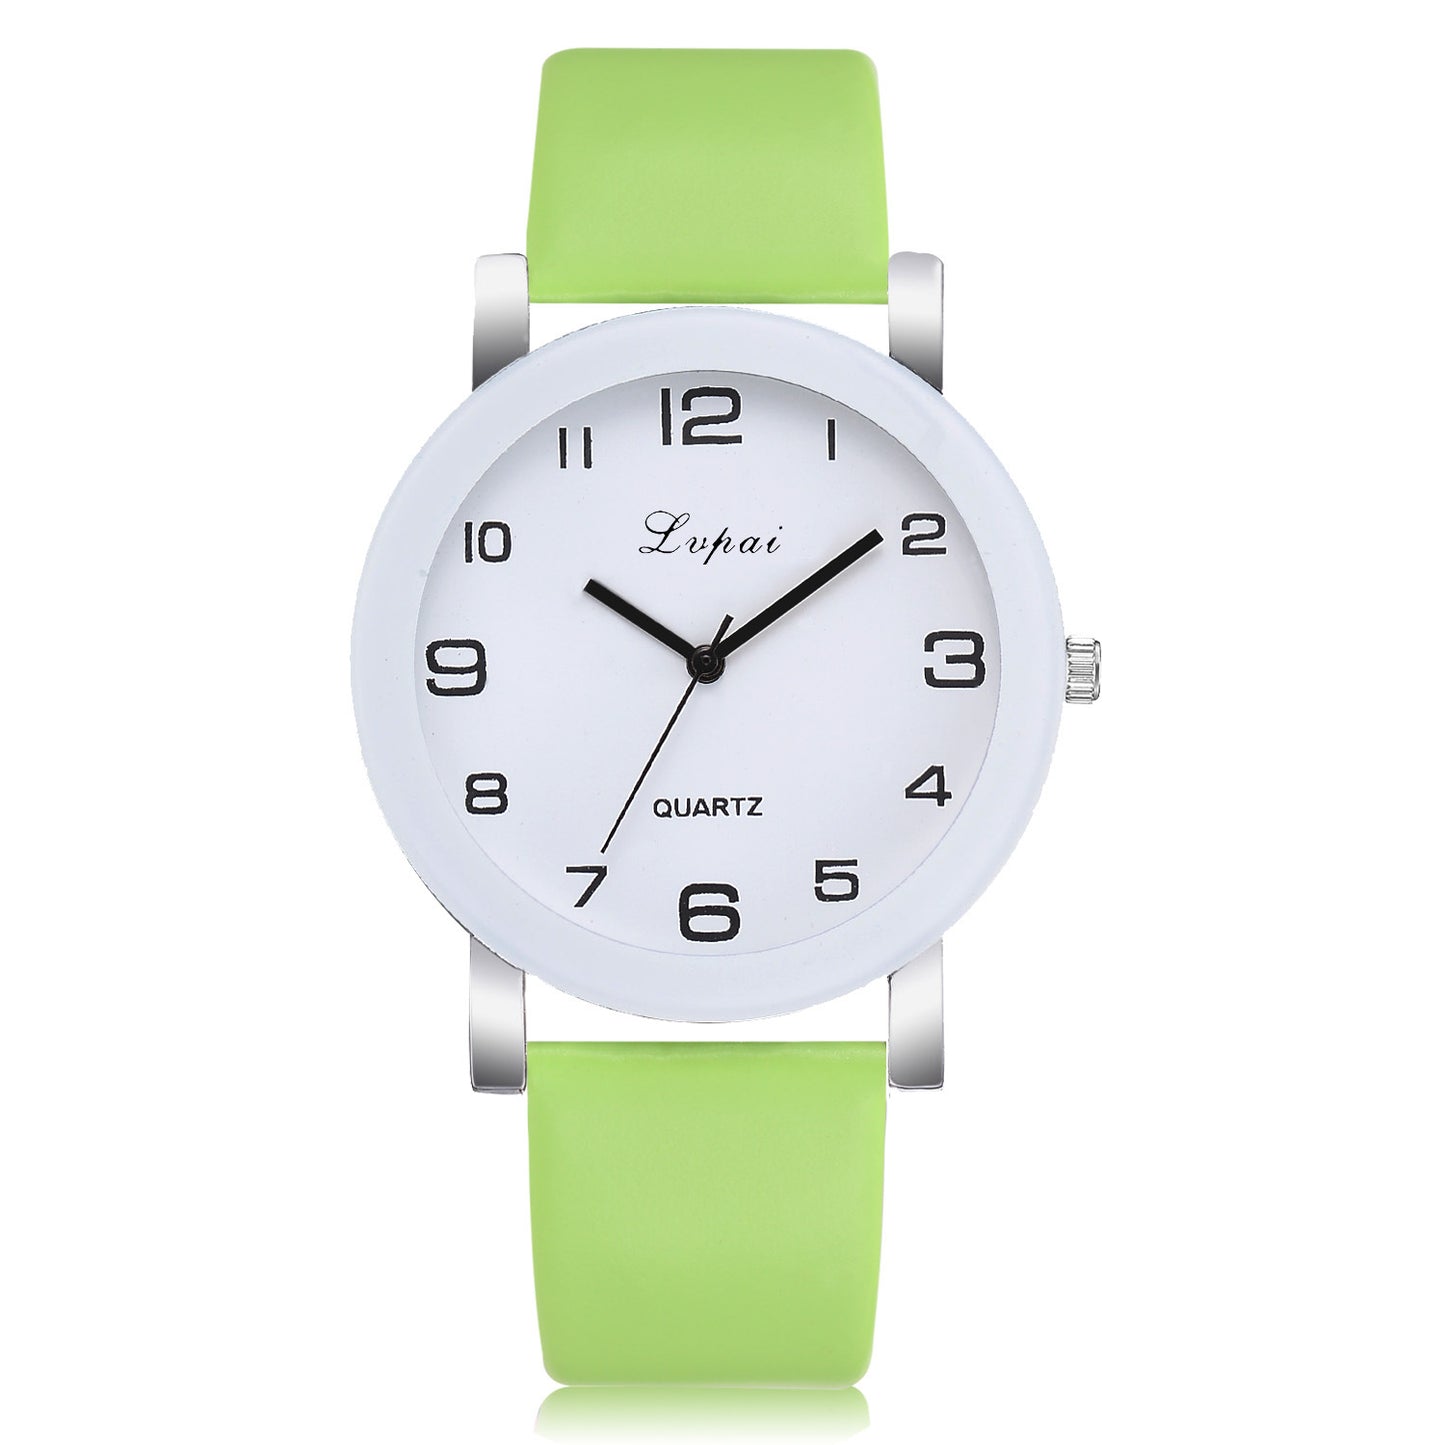 Simple casual digital student watch